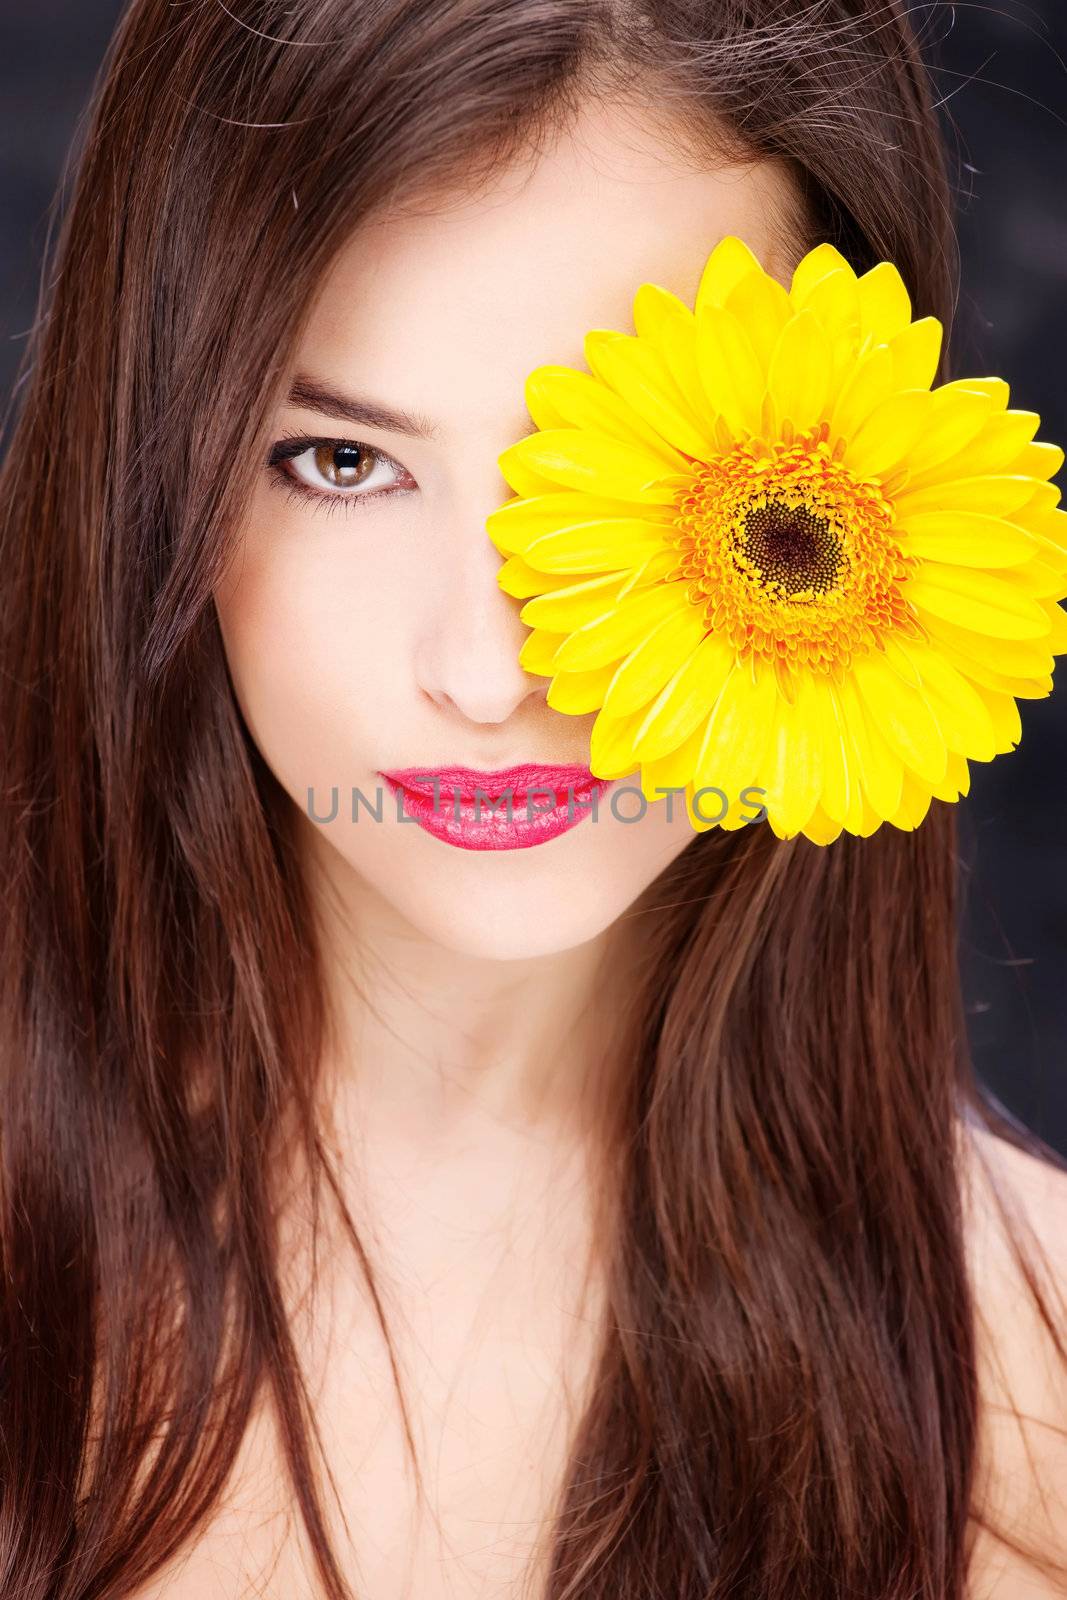 Yellow daisy over woman's eye by imarin